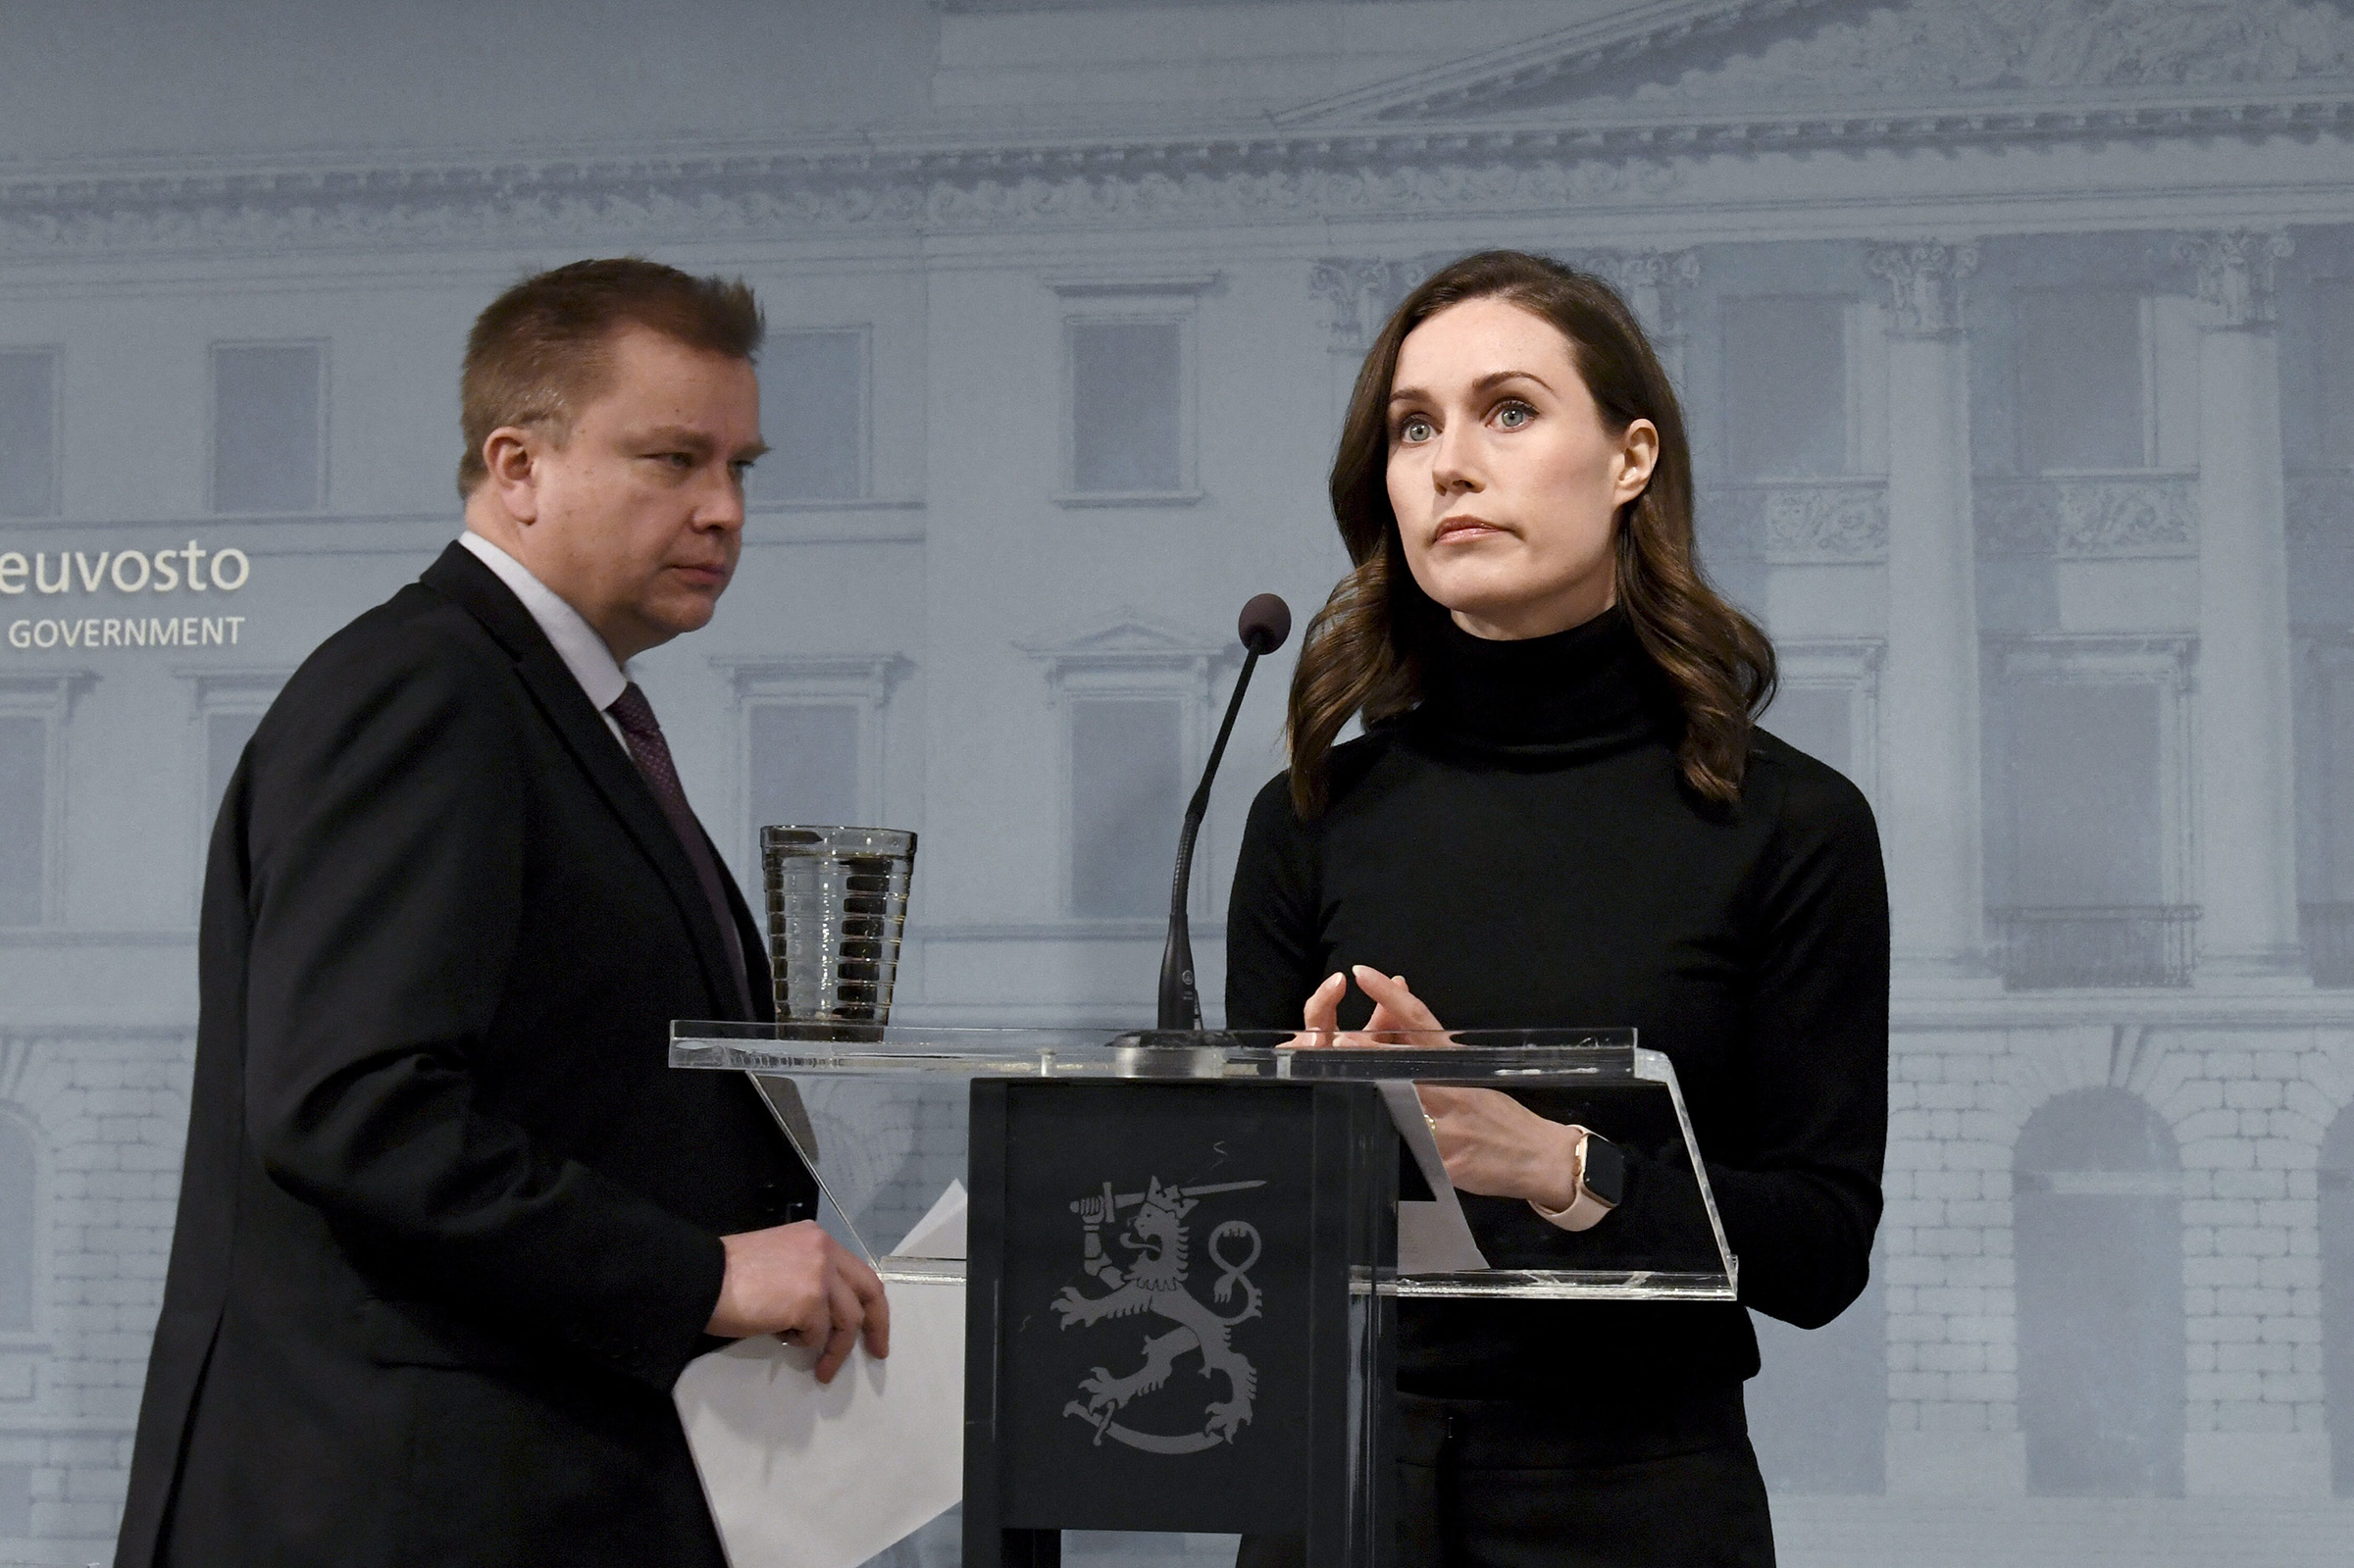 Finland's Prime Minister Sanna Marin, right, and Defense Minister Antti Kaikkonen arrive to address a press conference after the decision to supply arms to Ukraine, in Helsinki, Finland, on Feb. 28, 2022. (Jussi Nukari—Lehtikuva/AFP/Getty Images)